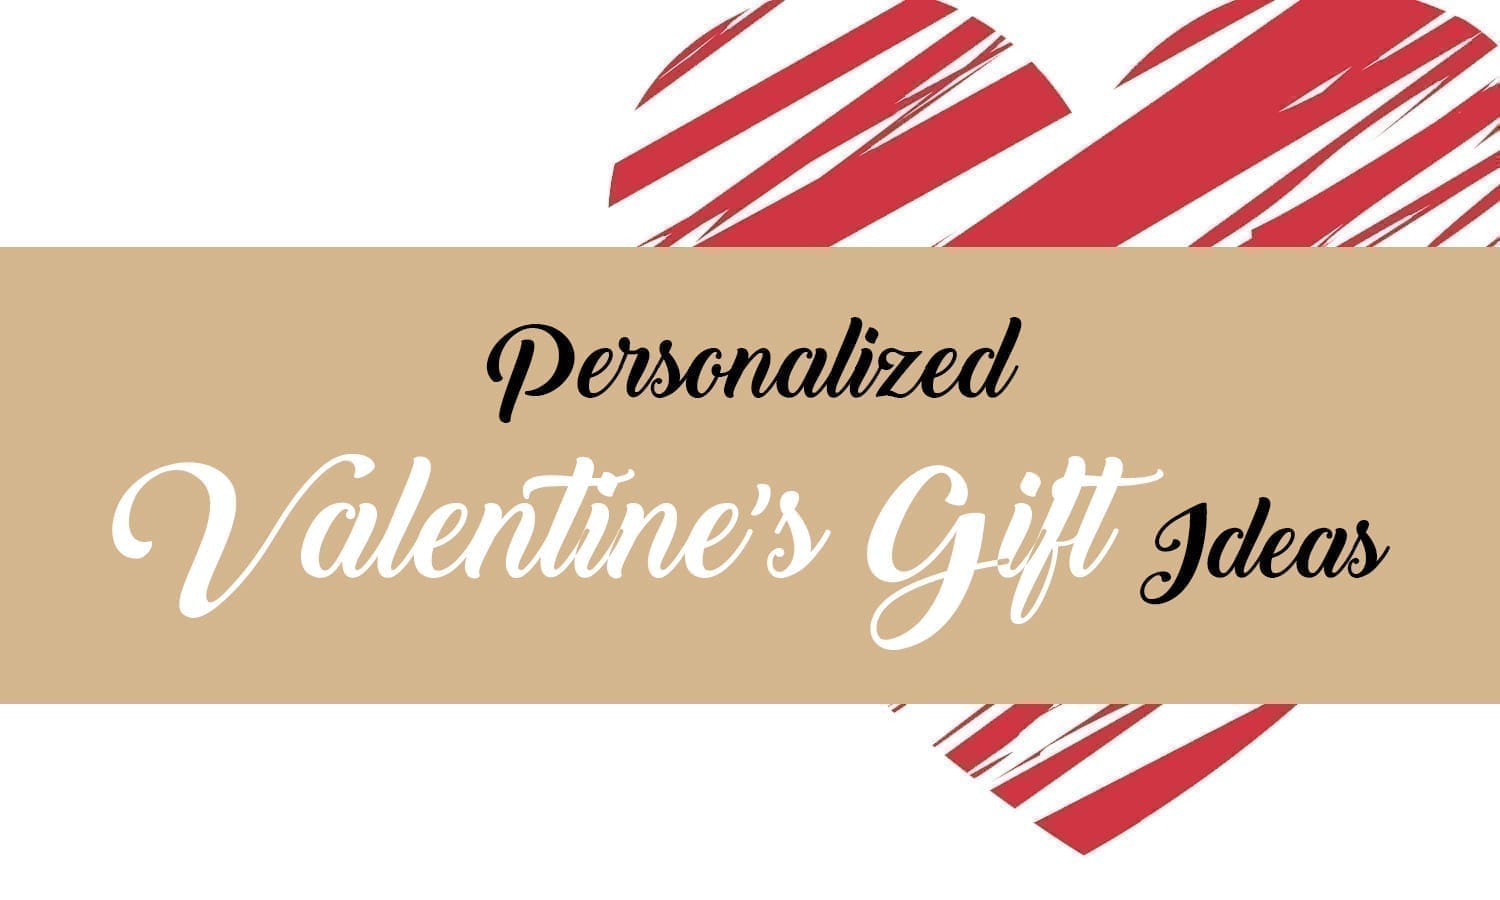 Top Eight Valentine Day Gifts